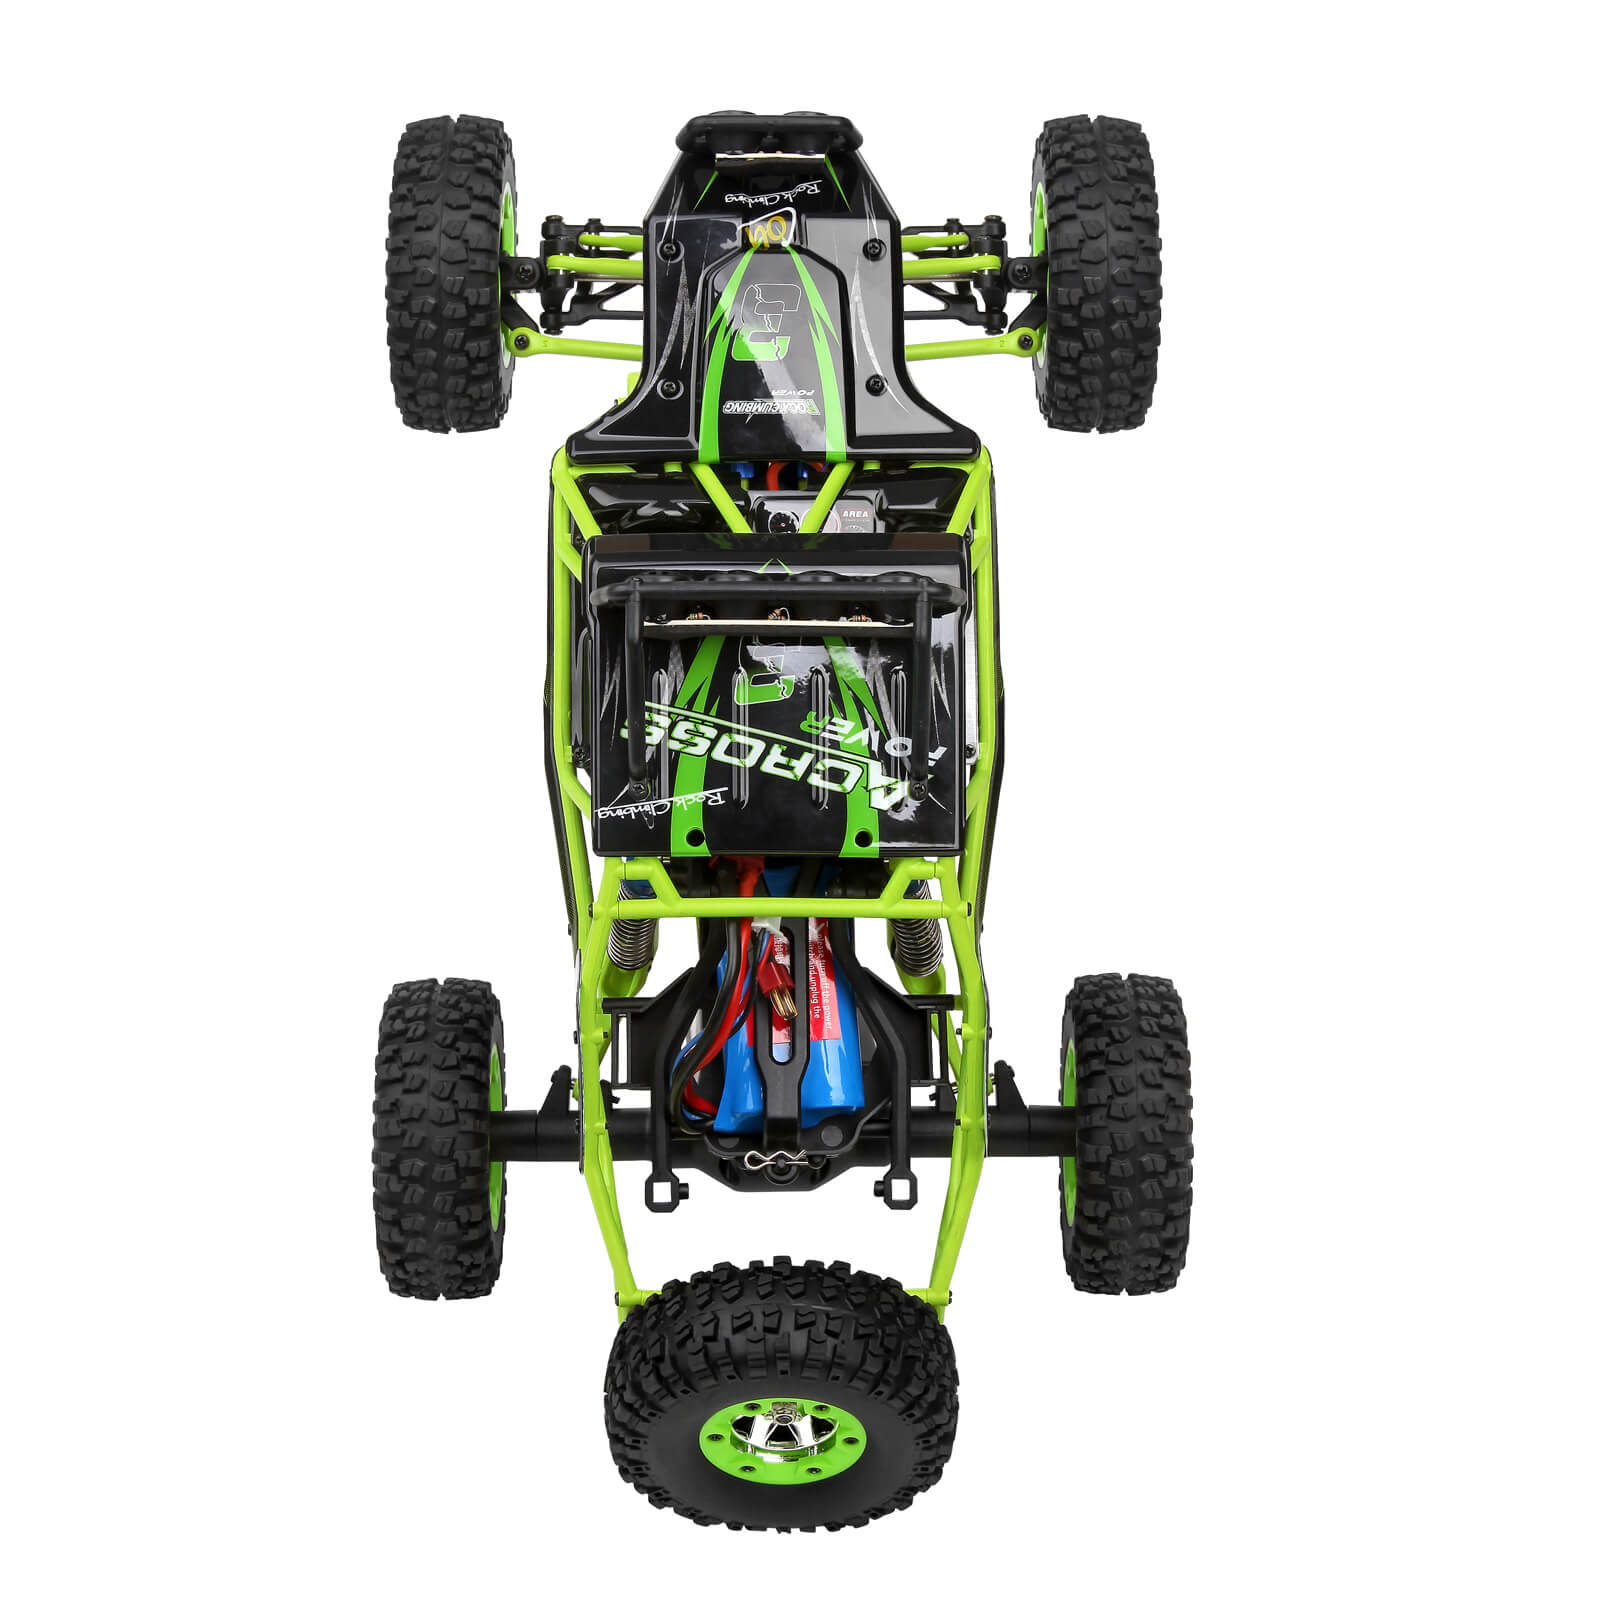 RC Car Electric Brushed Crawler RTR Auto Gift Wltoys 12428 Échelle 1/12 2.4G 4WD Vert